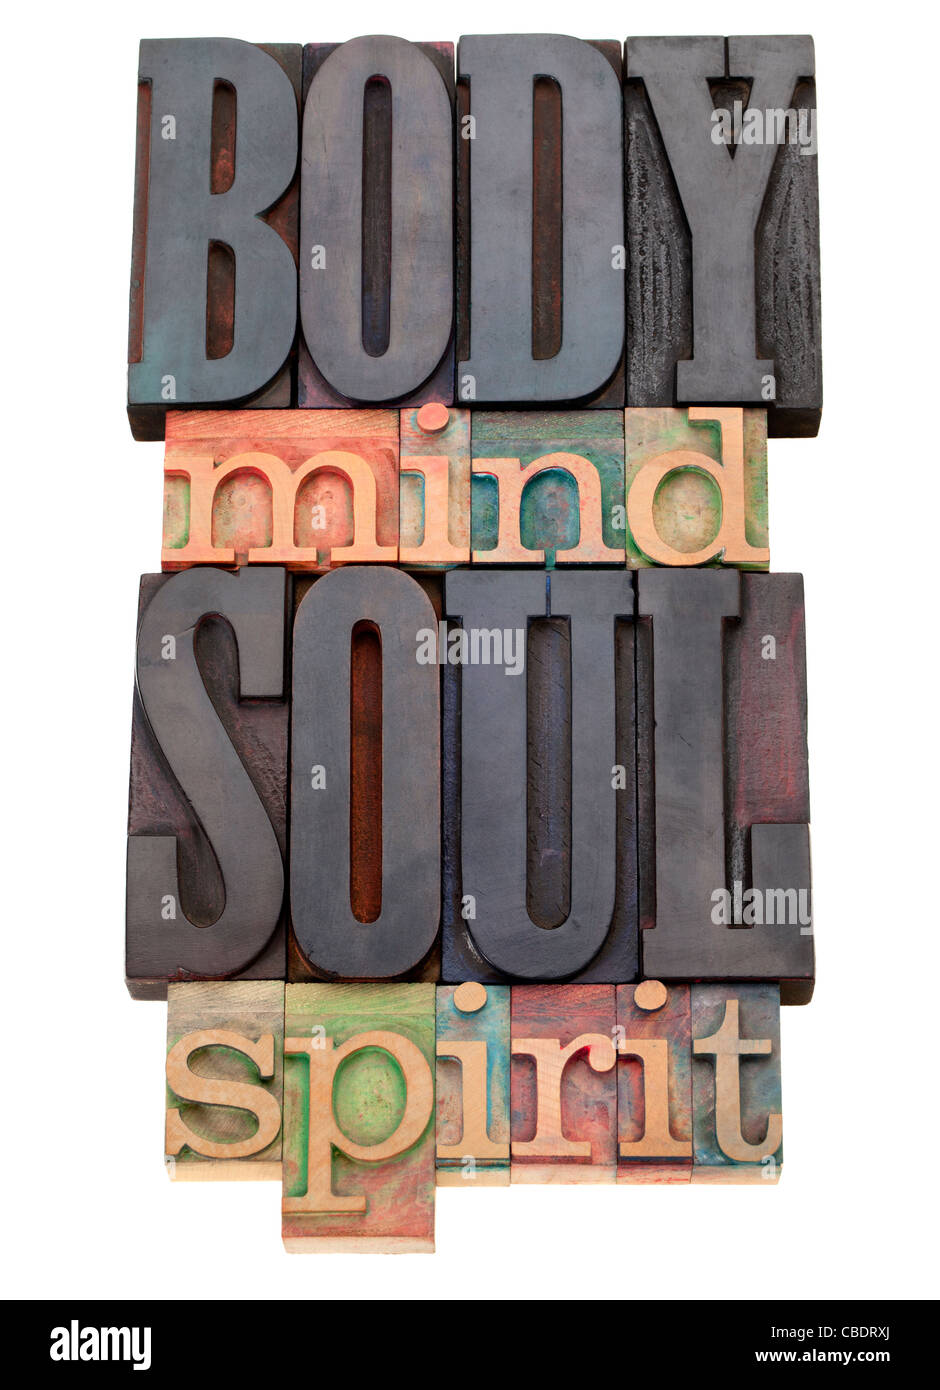 body, mind, soul, spirit - isolated word abstract in vintage wood letterpress printing blocks Stock Photo